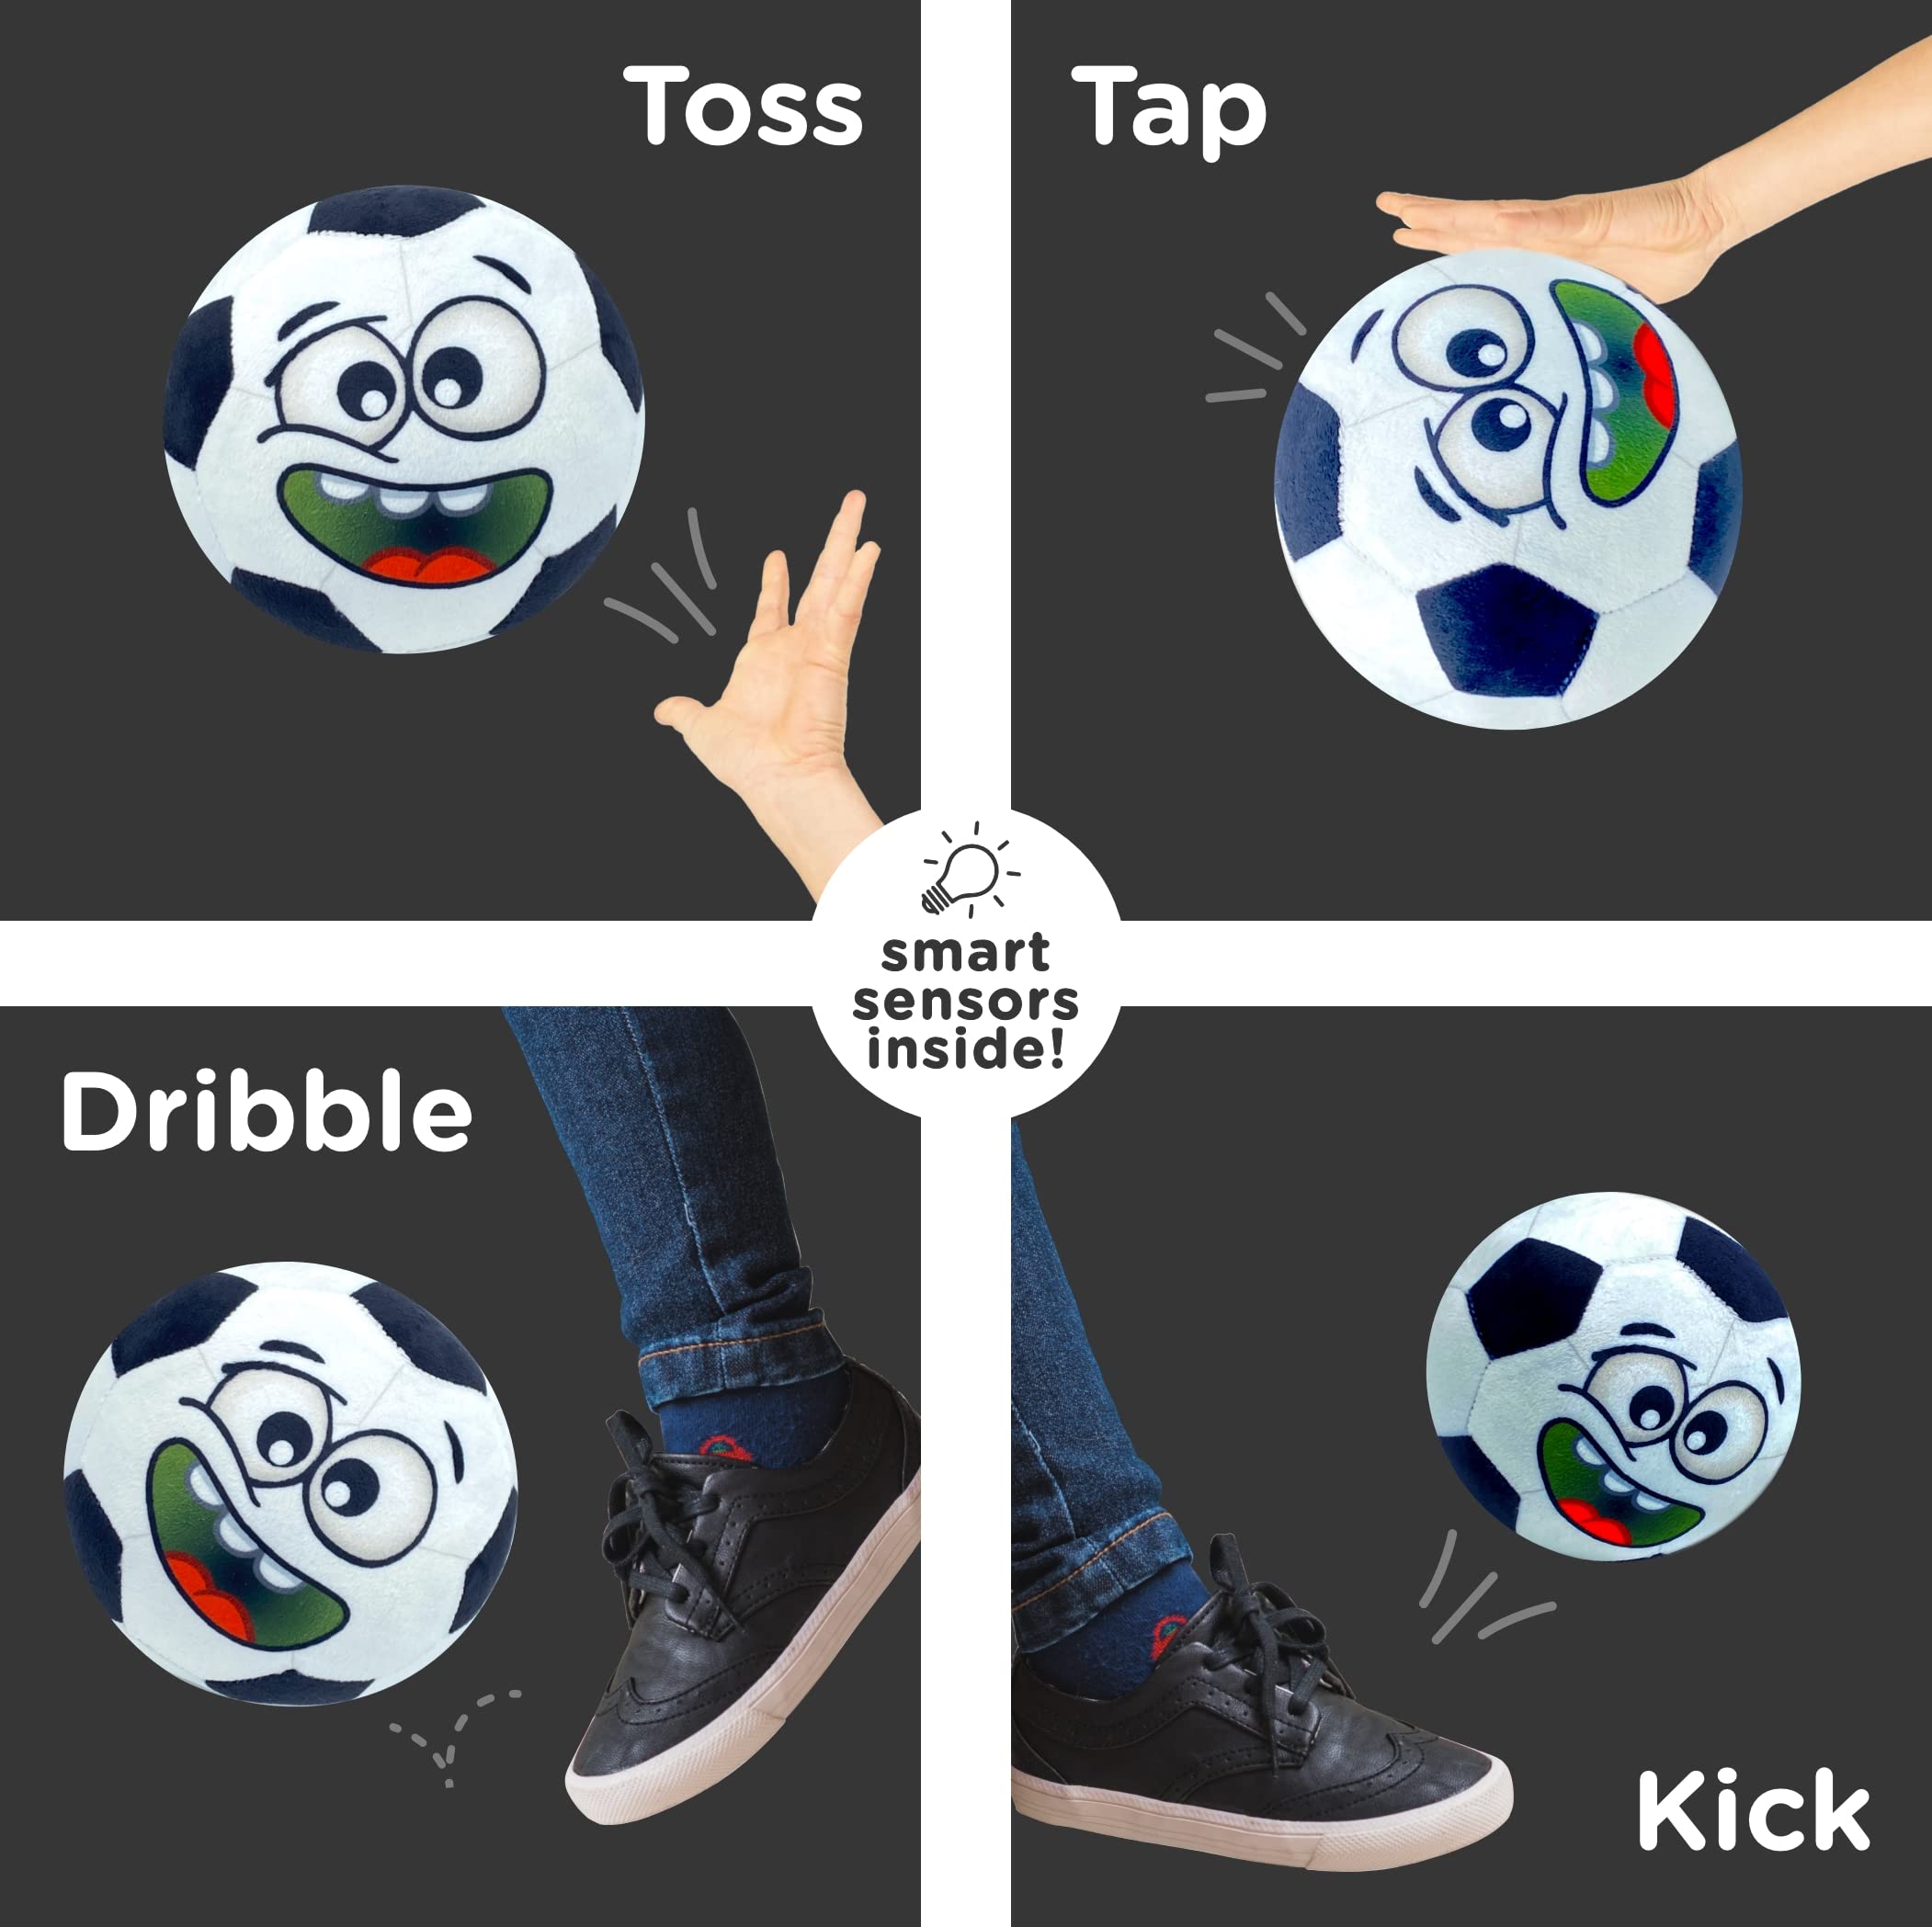 Move2Play, Hilariously Interactive Toy Soccer Ball with Music and Sound Effects, Ball for Toddlers, Birthday Gift For Boys and Girls 1, 2, 3+ Years Old